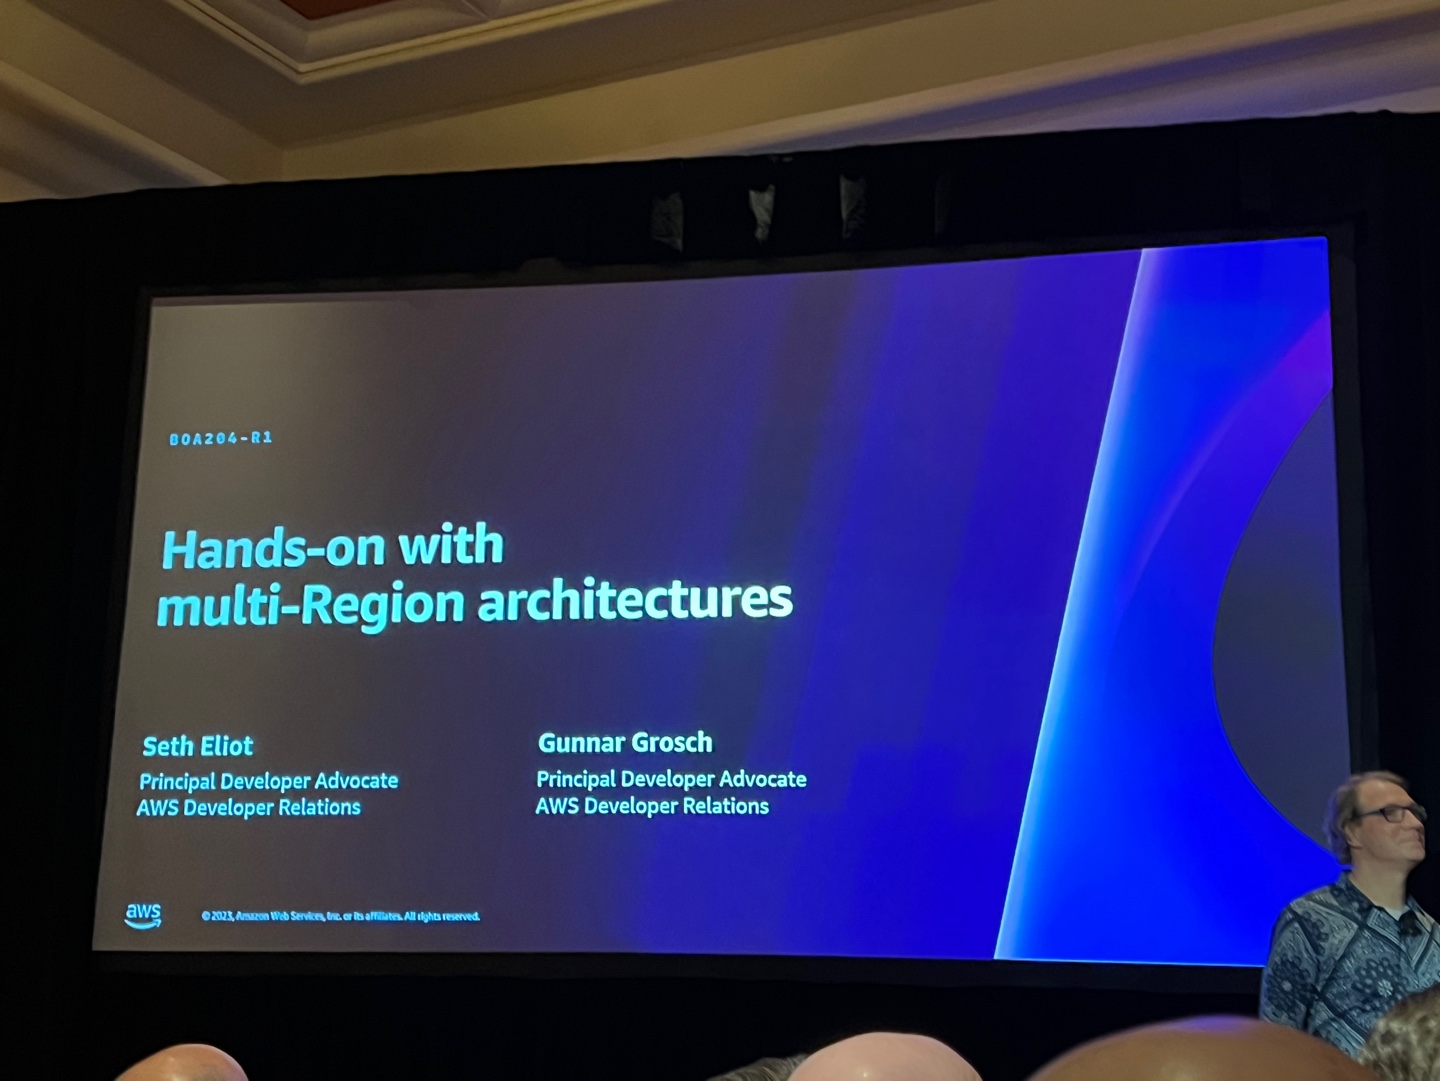 Hands-on with multi-Region architectures